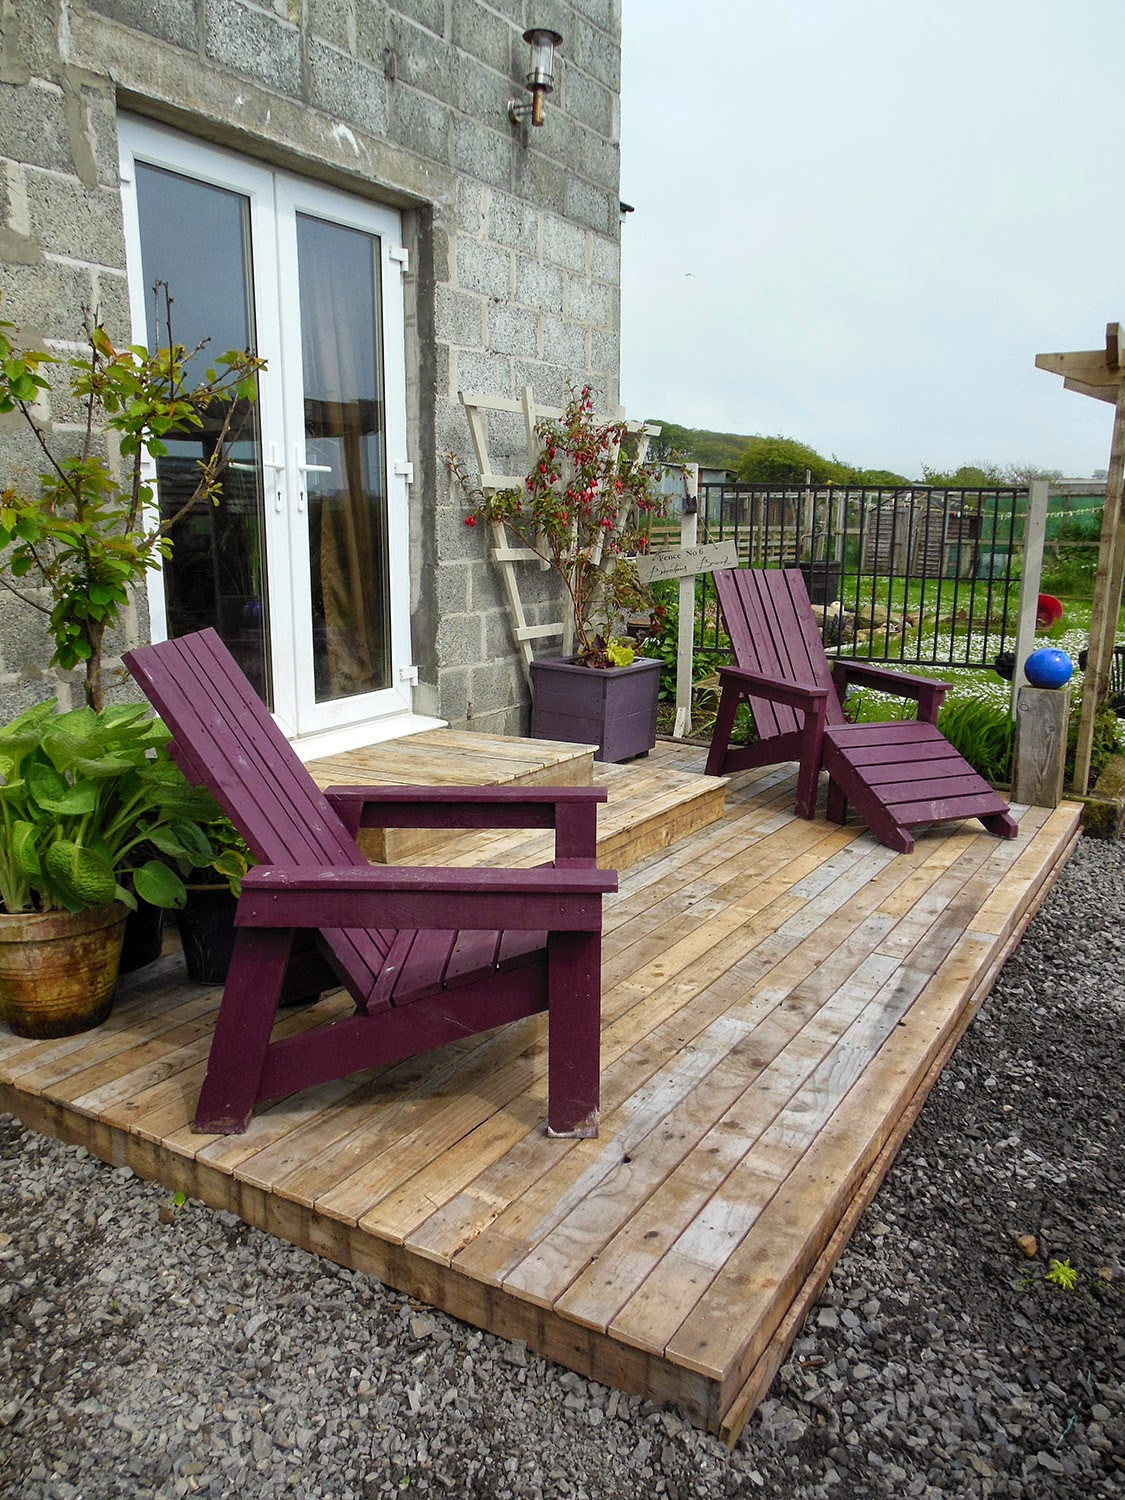 DIY Wooden Patio
 Coach House Crafting on a bud Diy pallet wood decking